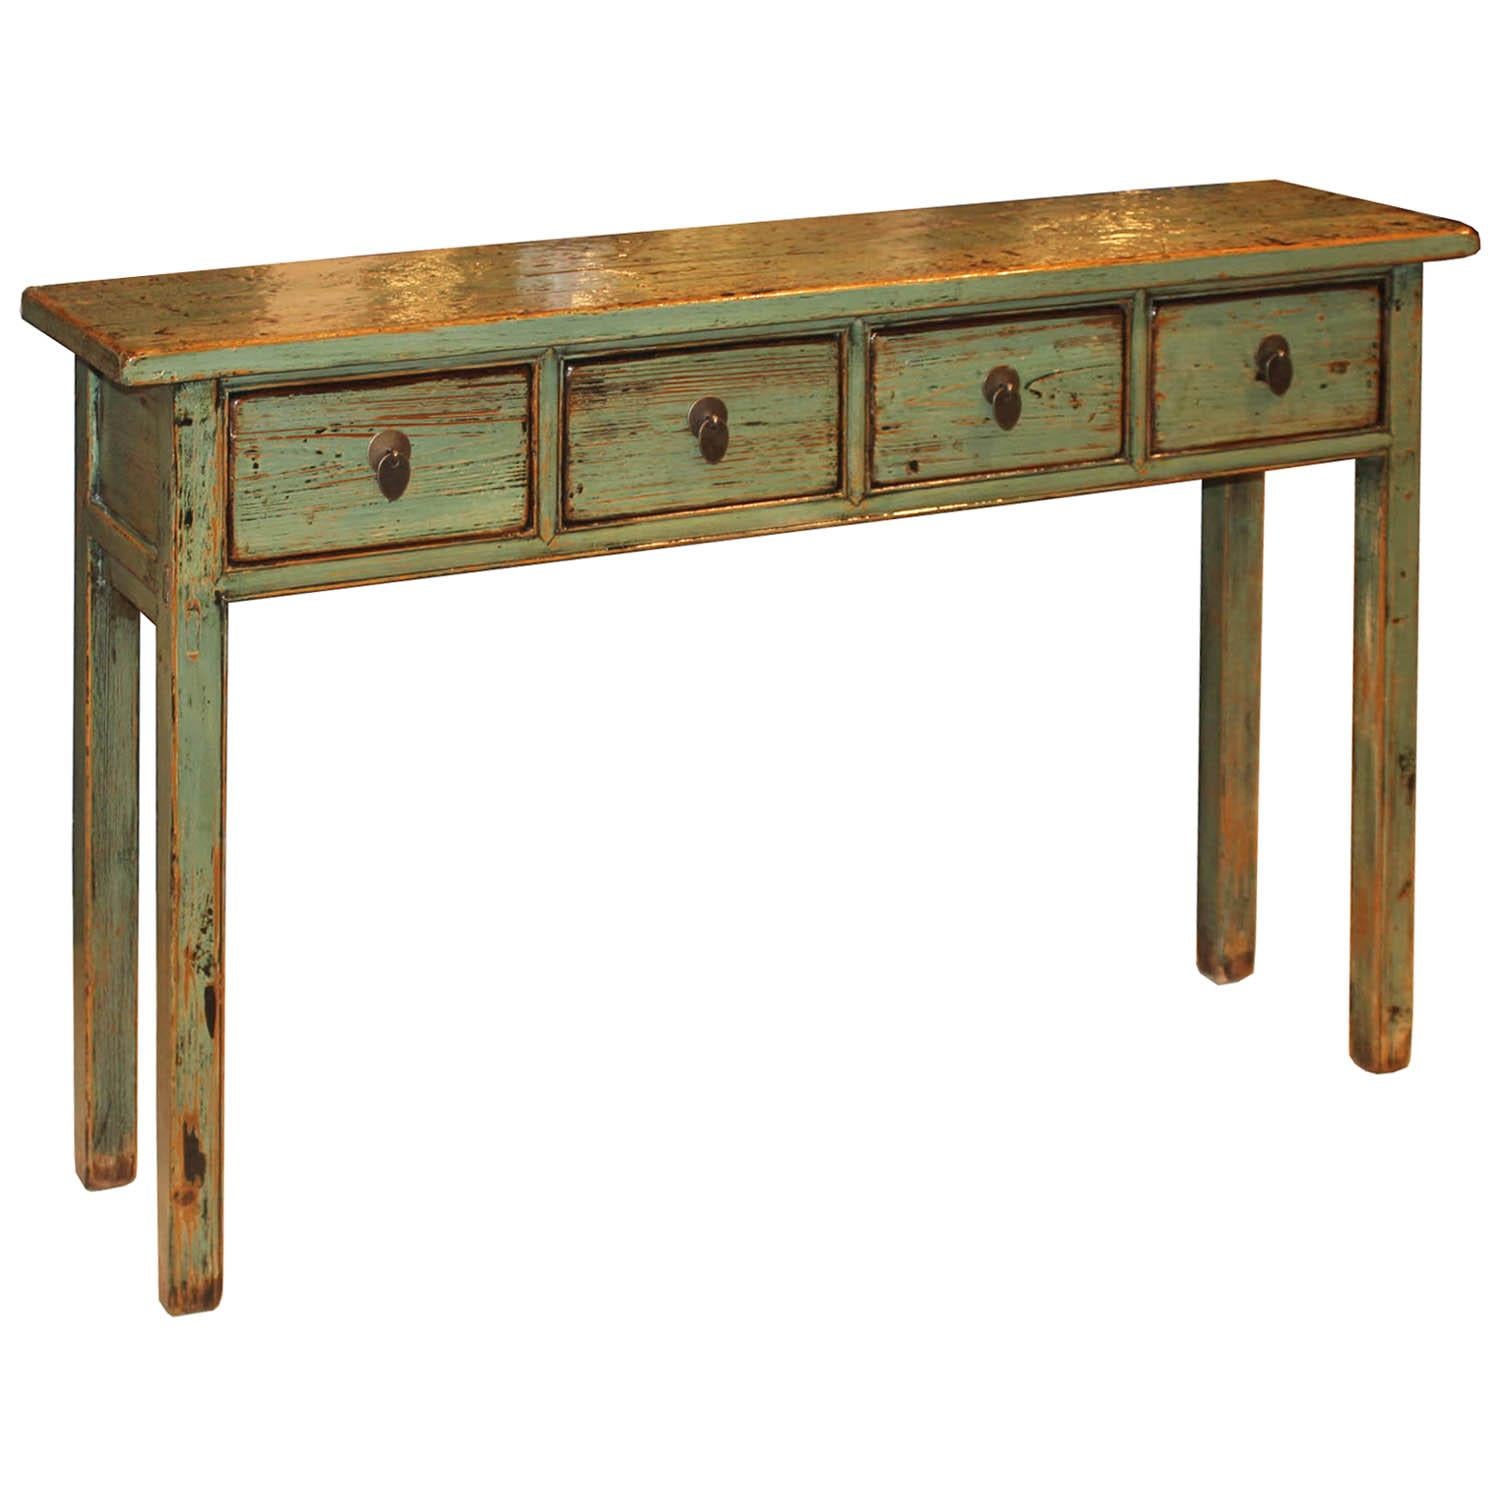 Vintage console table from northern China has been refinished with sage green lacquer highlighted by exposed wood edges and light distressing. Perfect as an accent table in the entry way with accessories on top. New hardware.